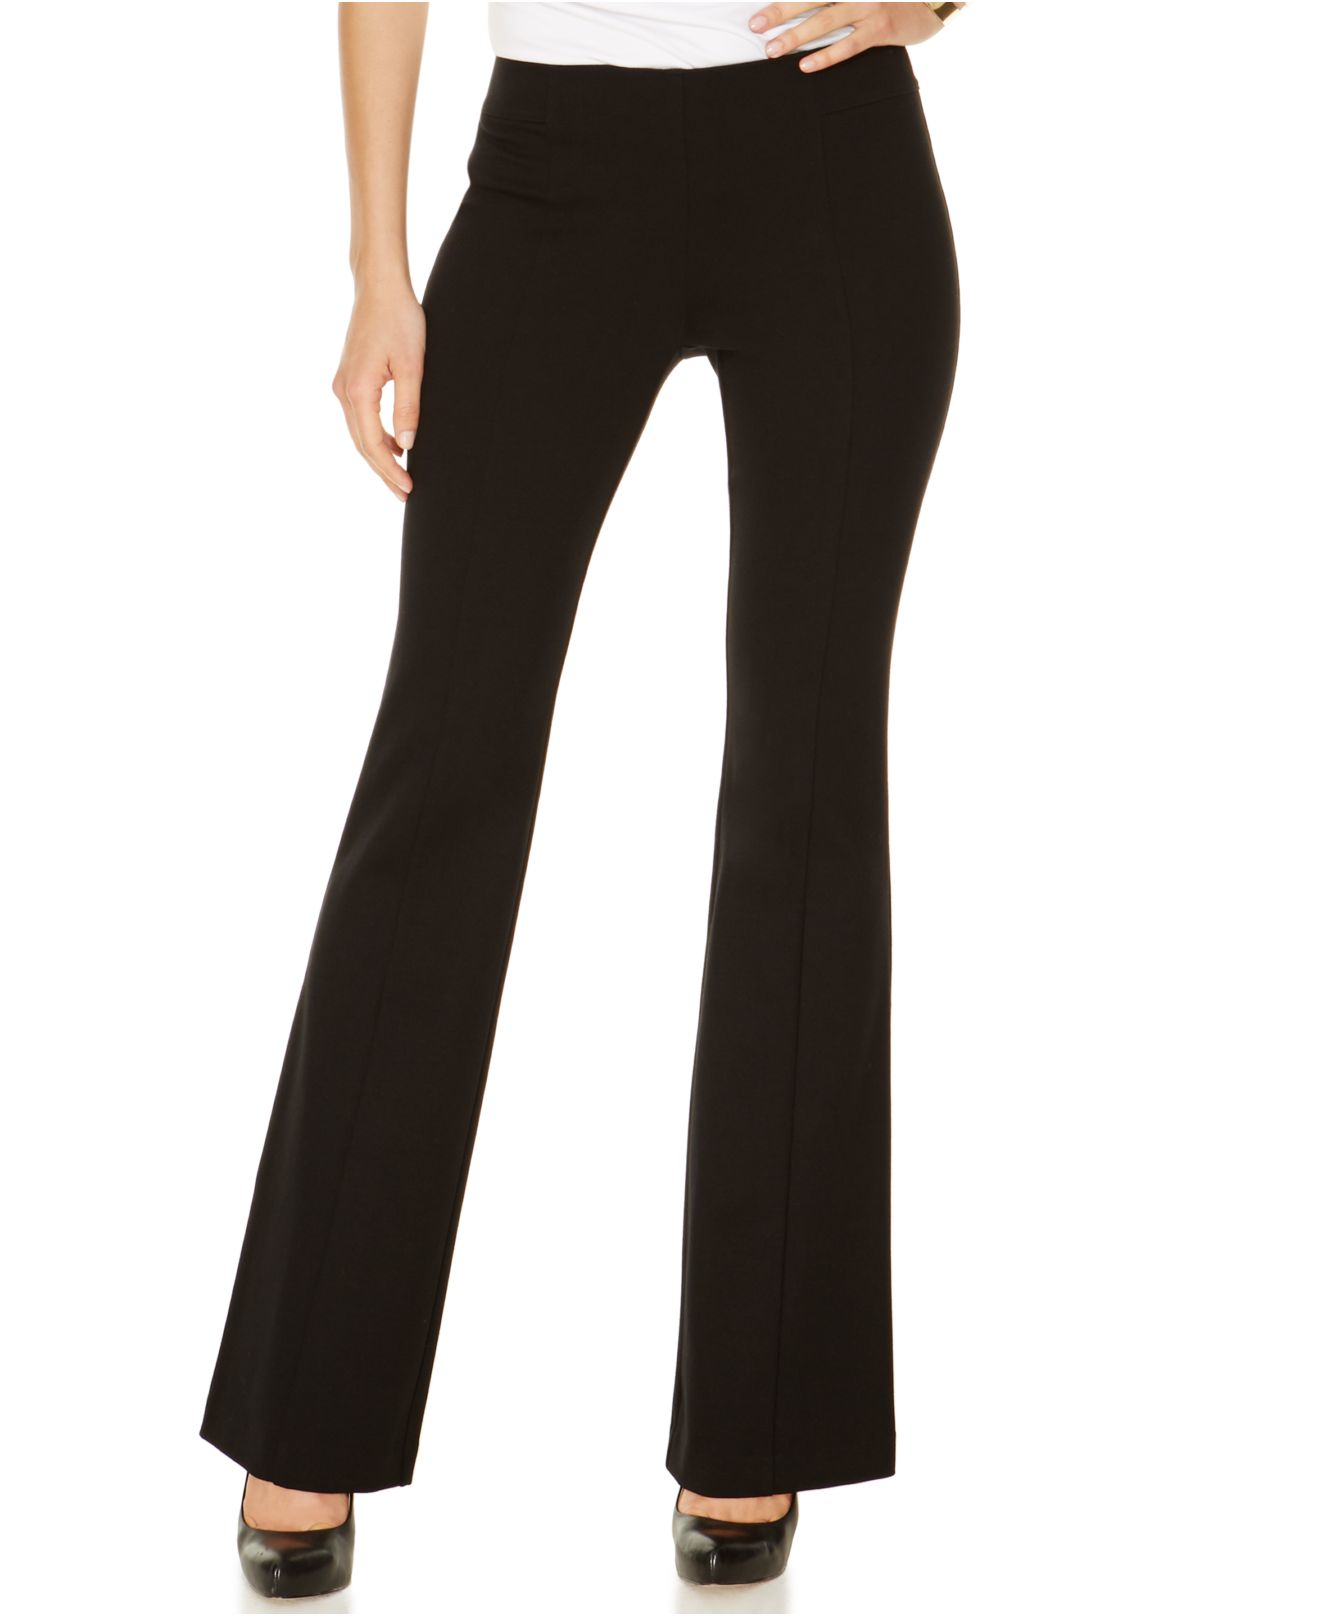 Inc international concepts Petite Curvy-fit Pull-on Bootcut Ponte Pants ...